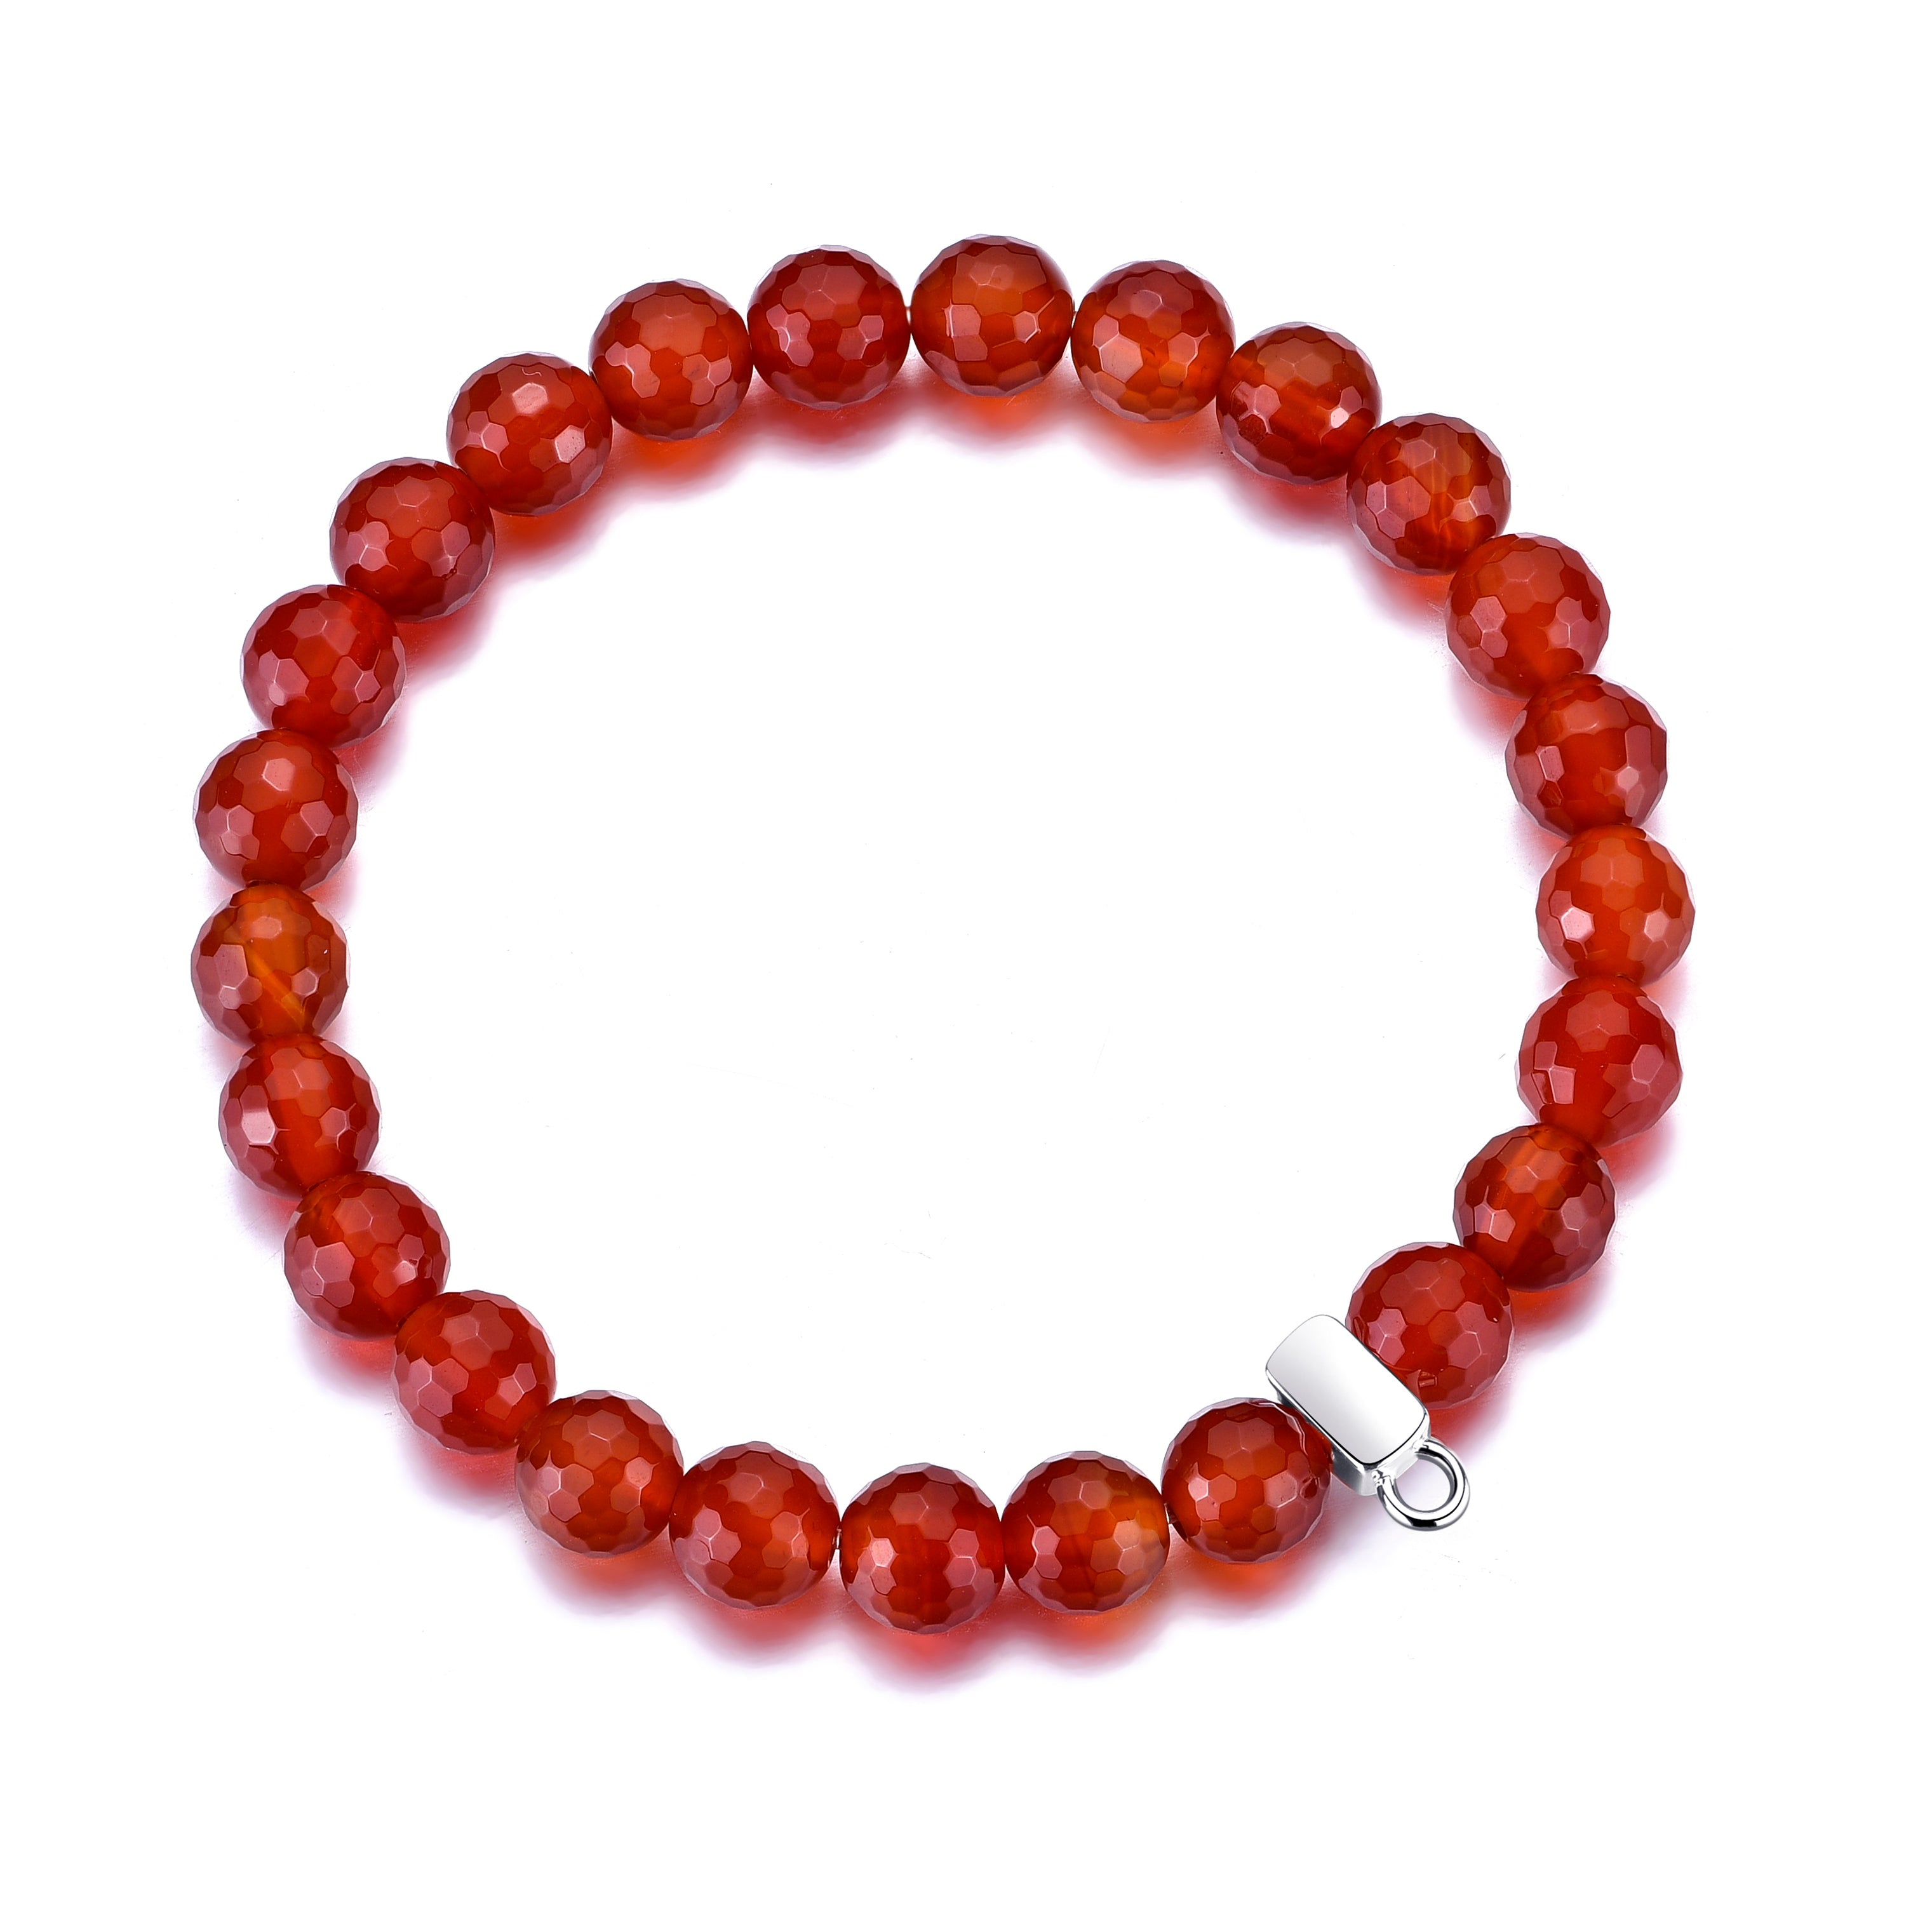 Faceted Carnelian Gemstone Stretch Bracelet with Charm Created with Zircondia® Crystals